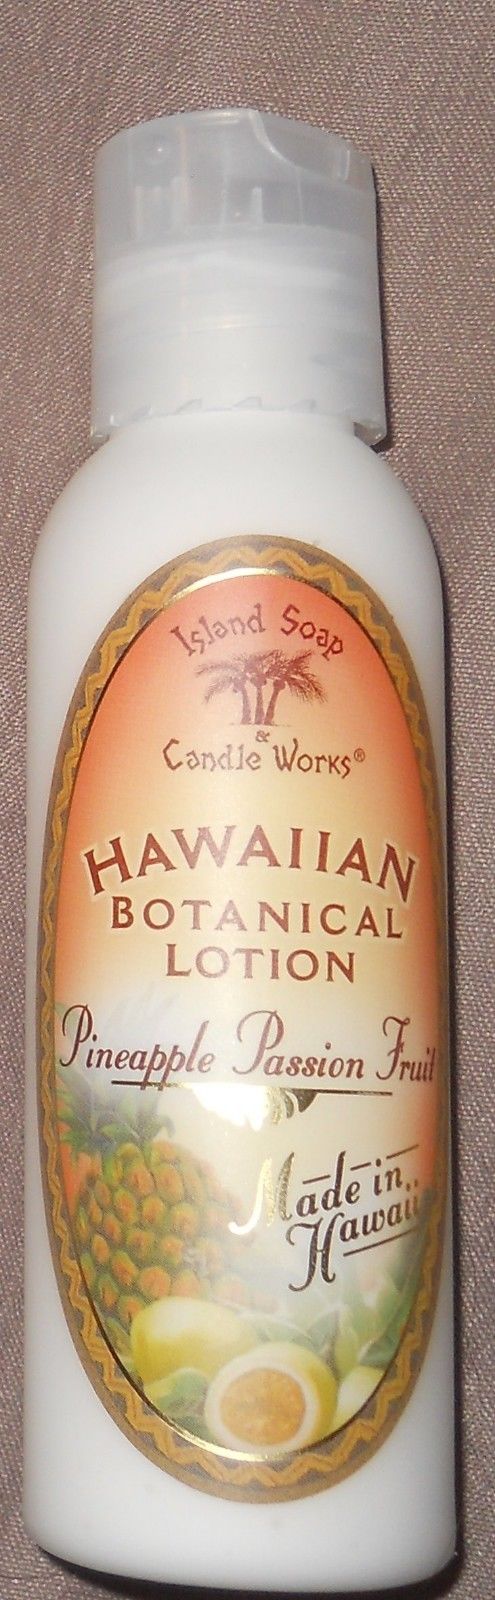 Hawaiian Botanical Lotion PINEAPPLE PASSION FRUIT 2 Oz  by Island Soap & Candle